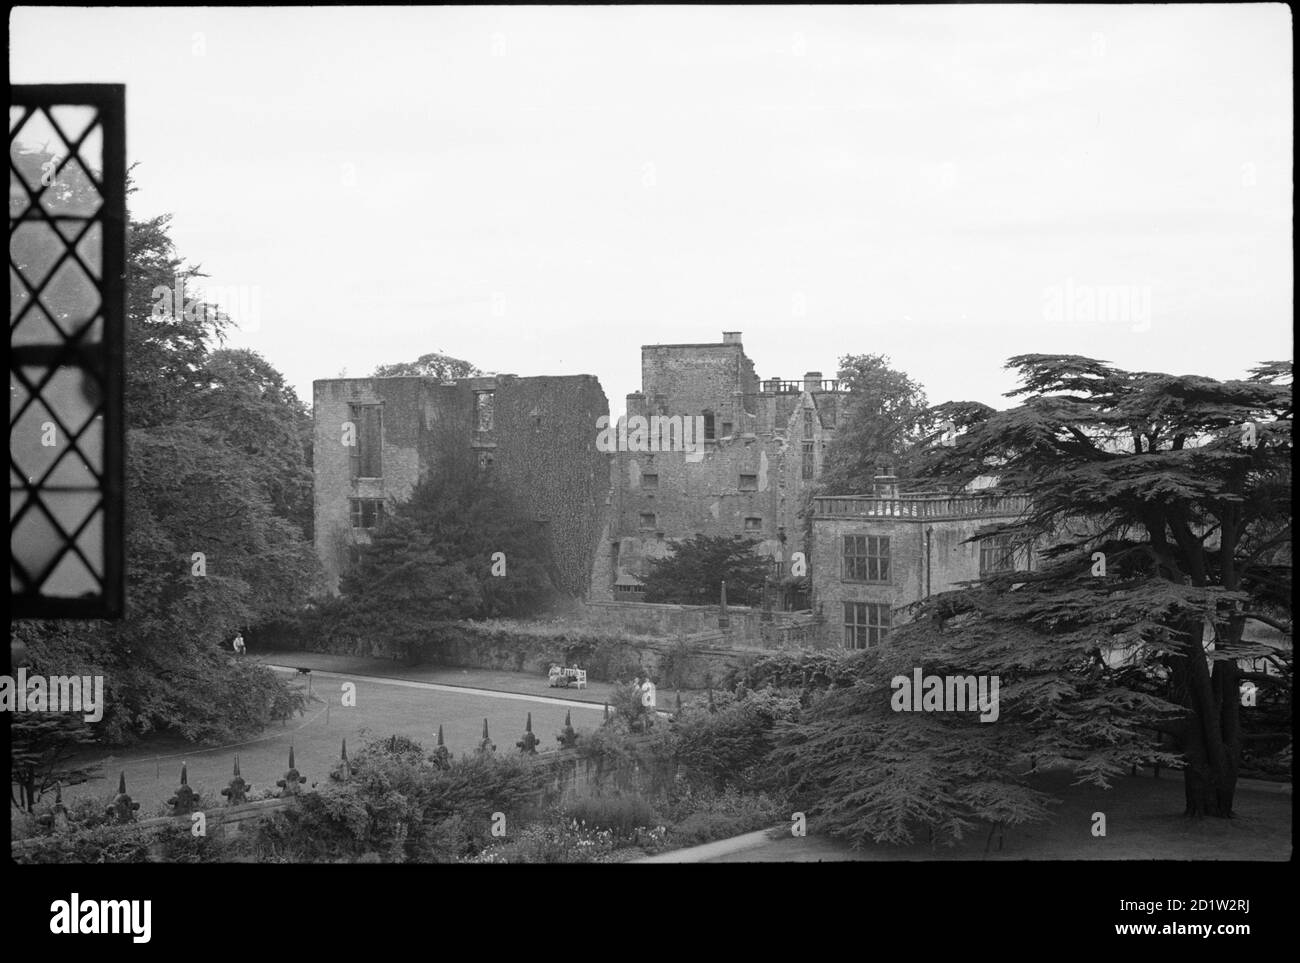 Exterior view of the ruins of Hardwick Old Hall, seen from a window in the west front of Hardwick Hall, showing the top of the west garden, over the garden wall to the ruins in the south-west, Chesterfield, Derbyshire, UK. Stock Photo